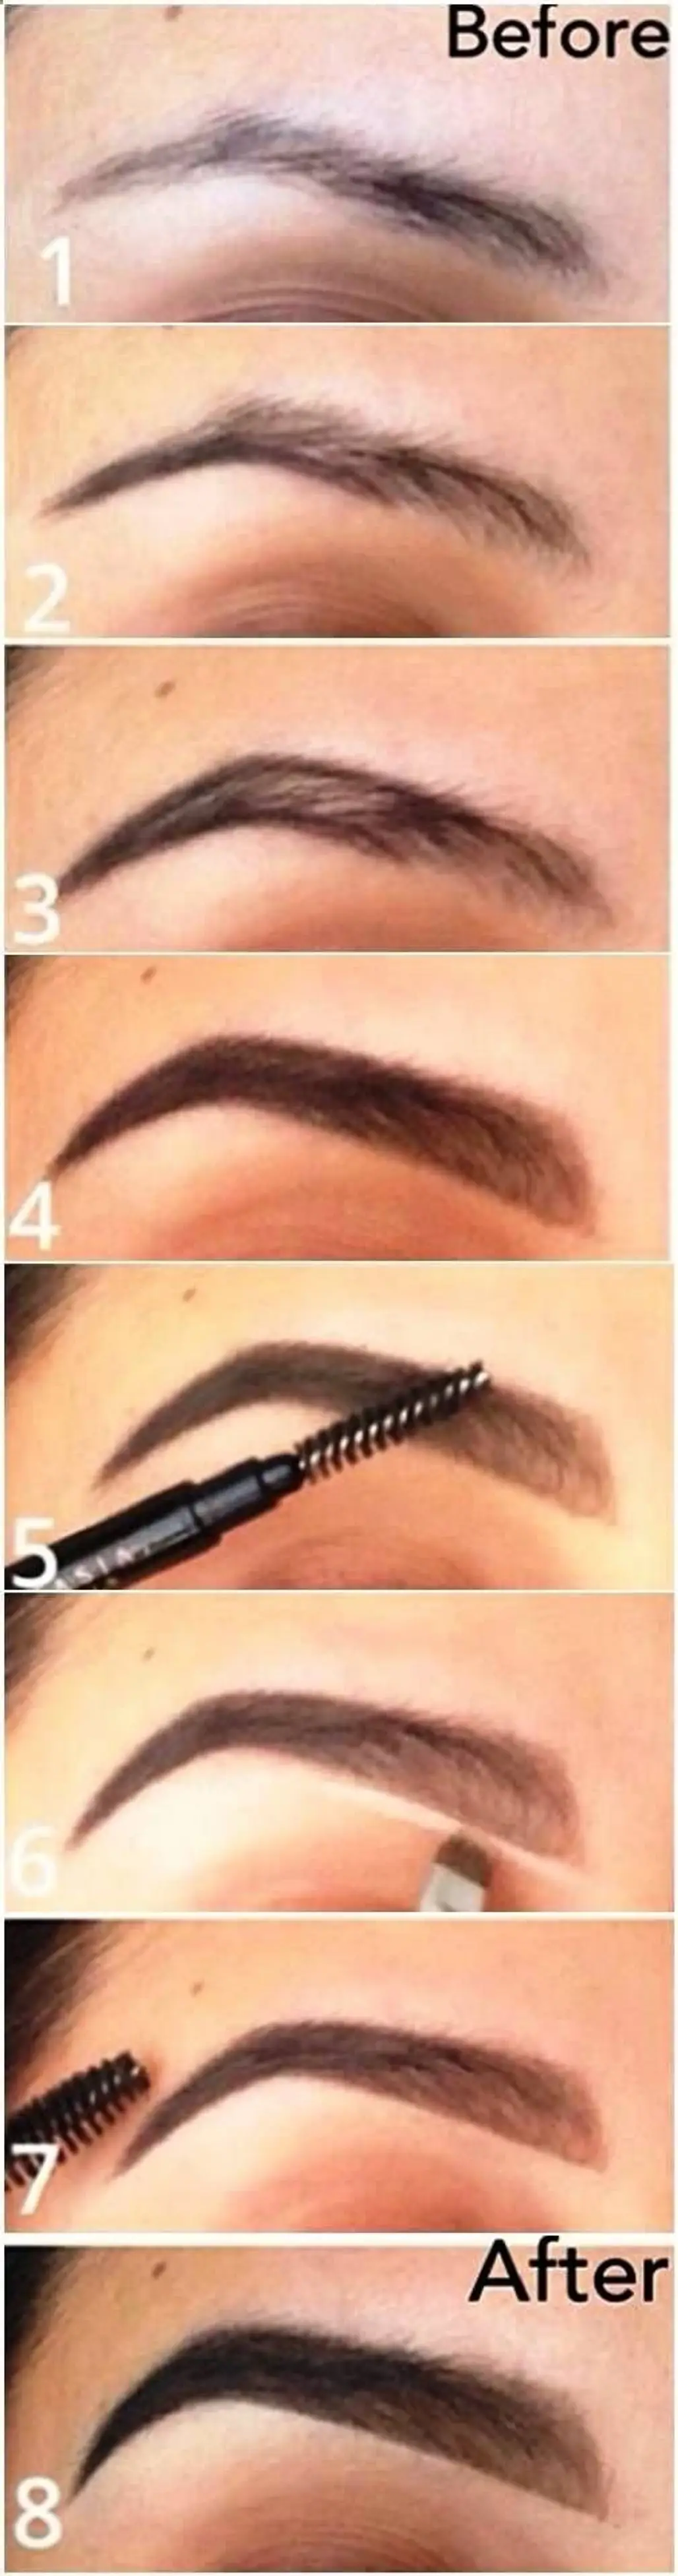 How to: Brow - from Start to Finish